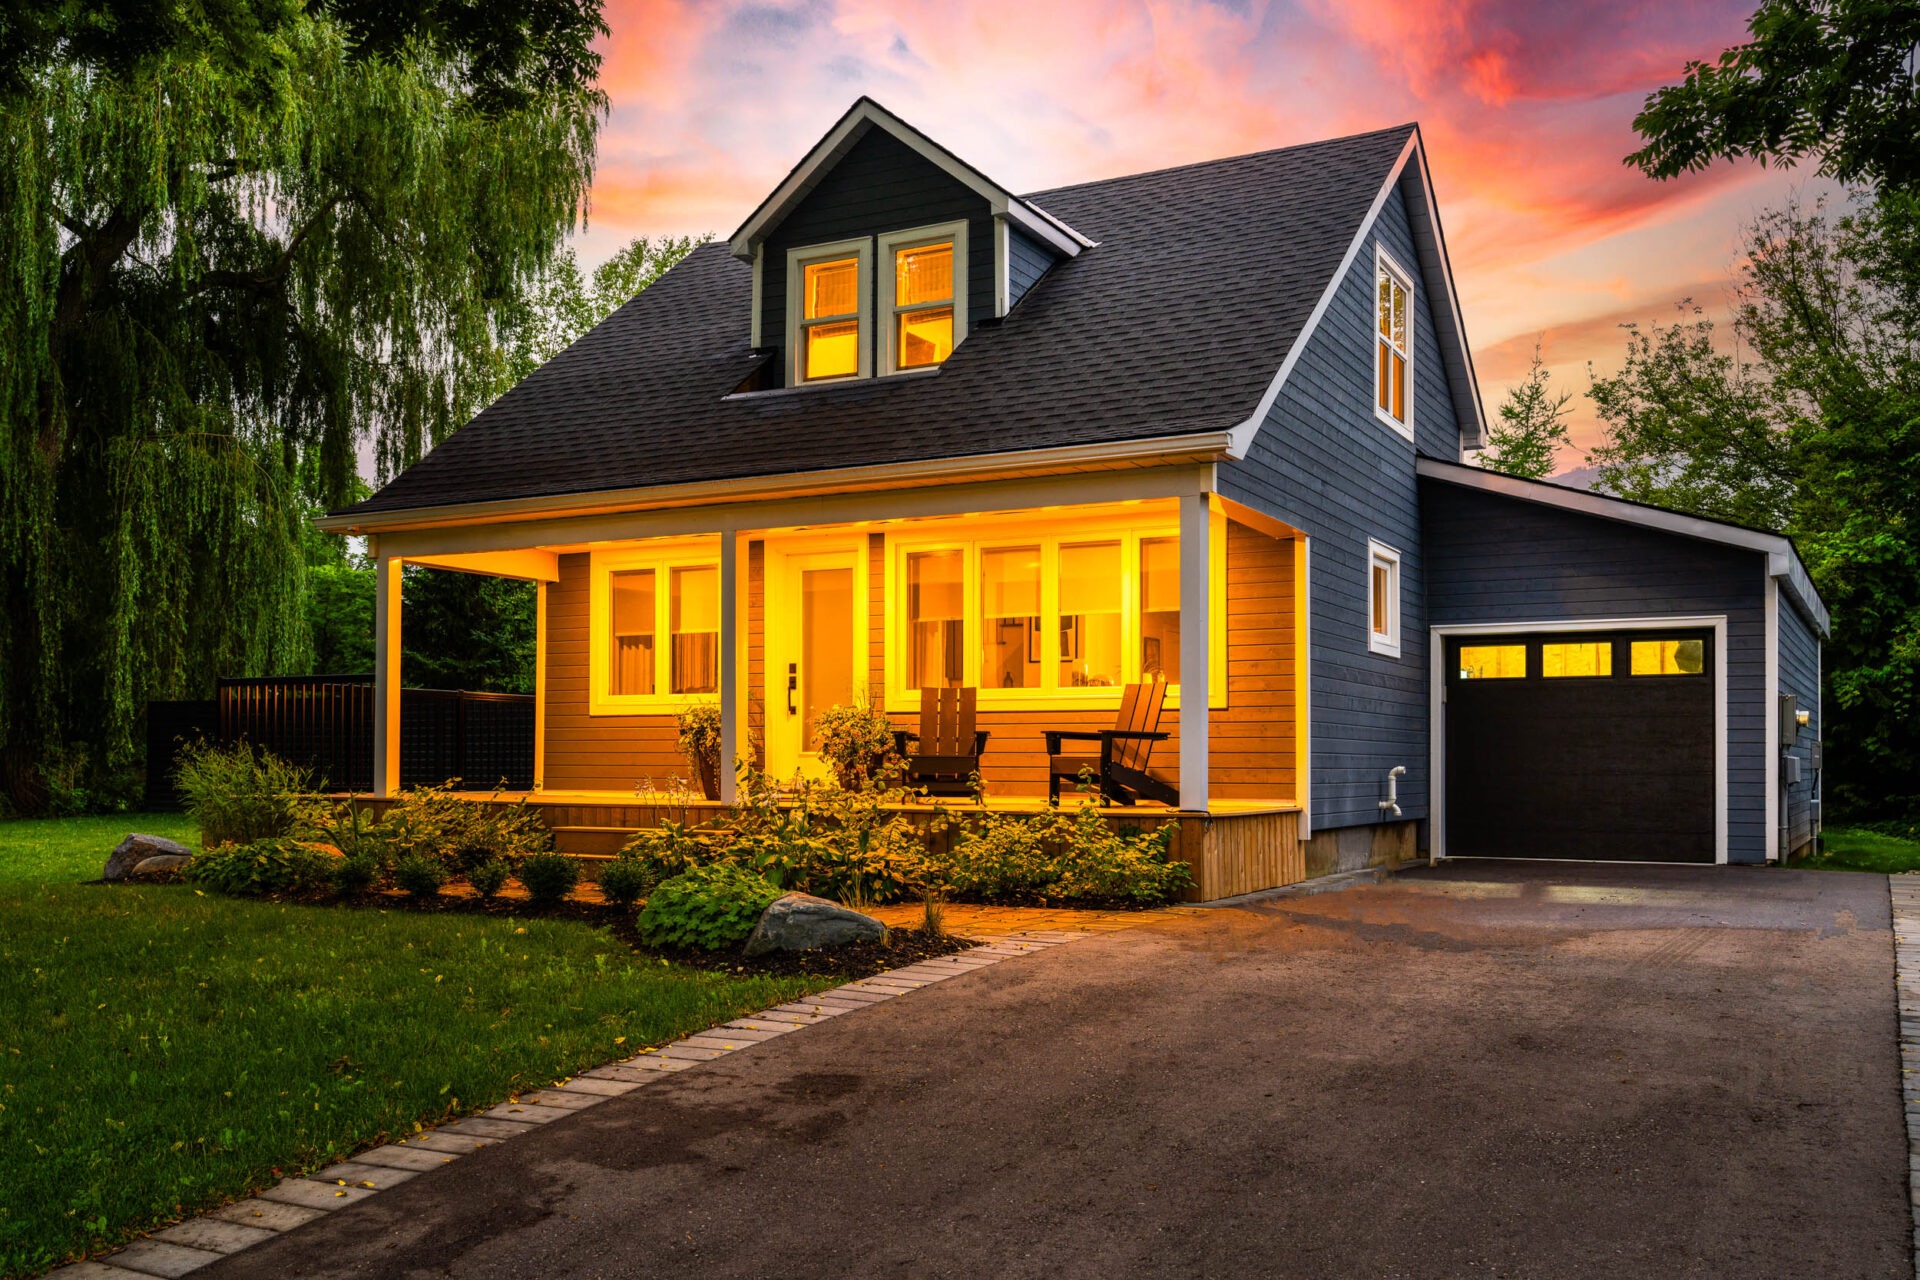 Charming two-story house with gray siding and yellow-lit windows during twilight. Cozy porch with chairs, attached garage, lush greenery, and a vibrant sky.